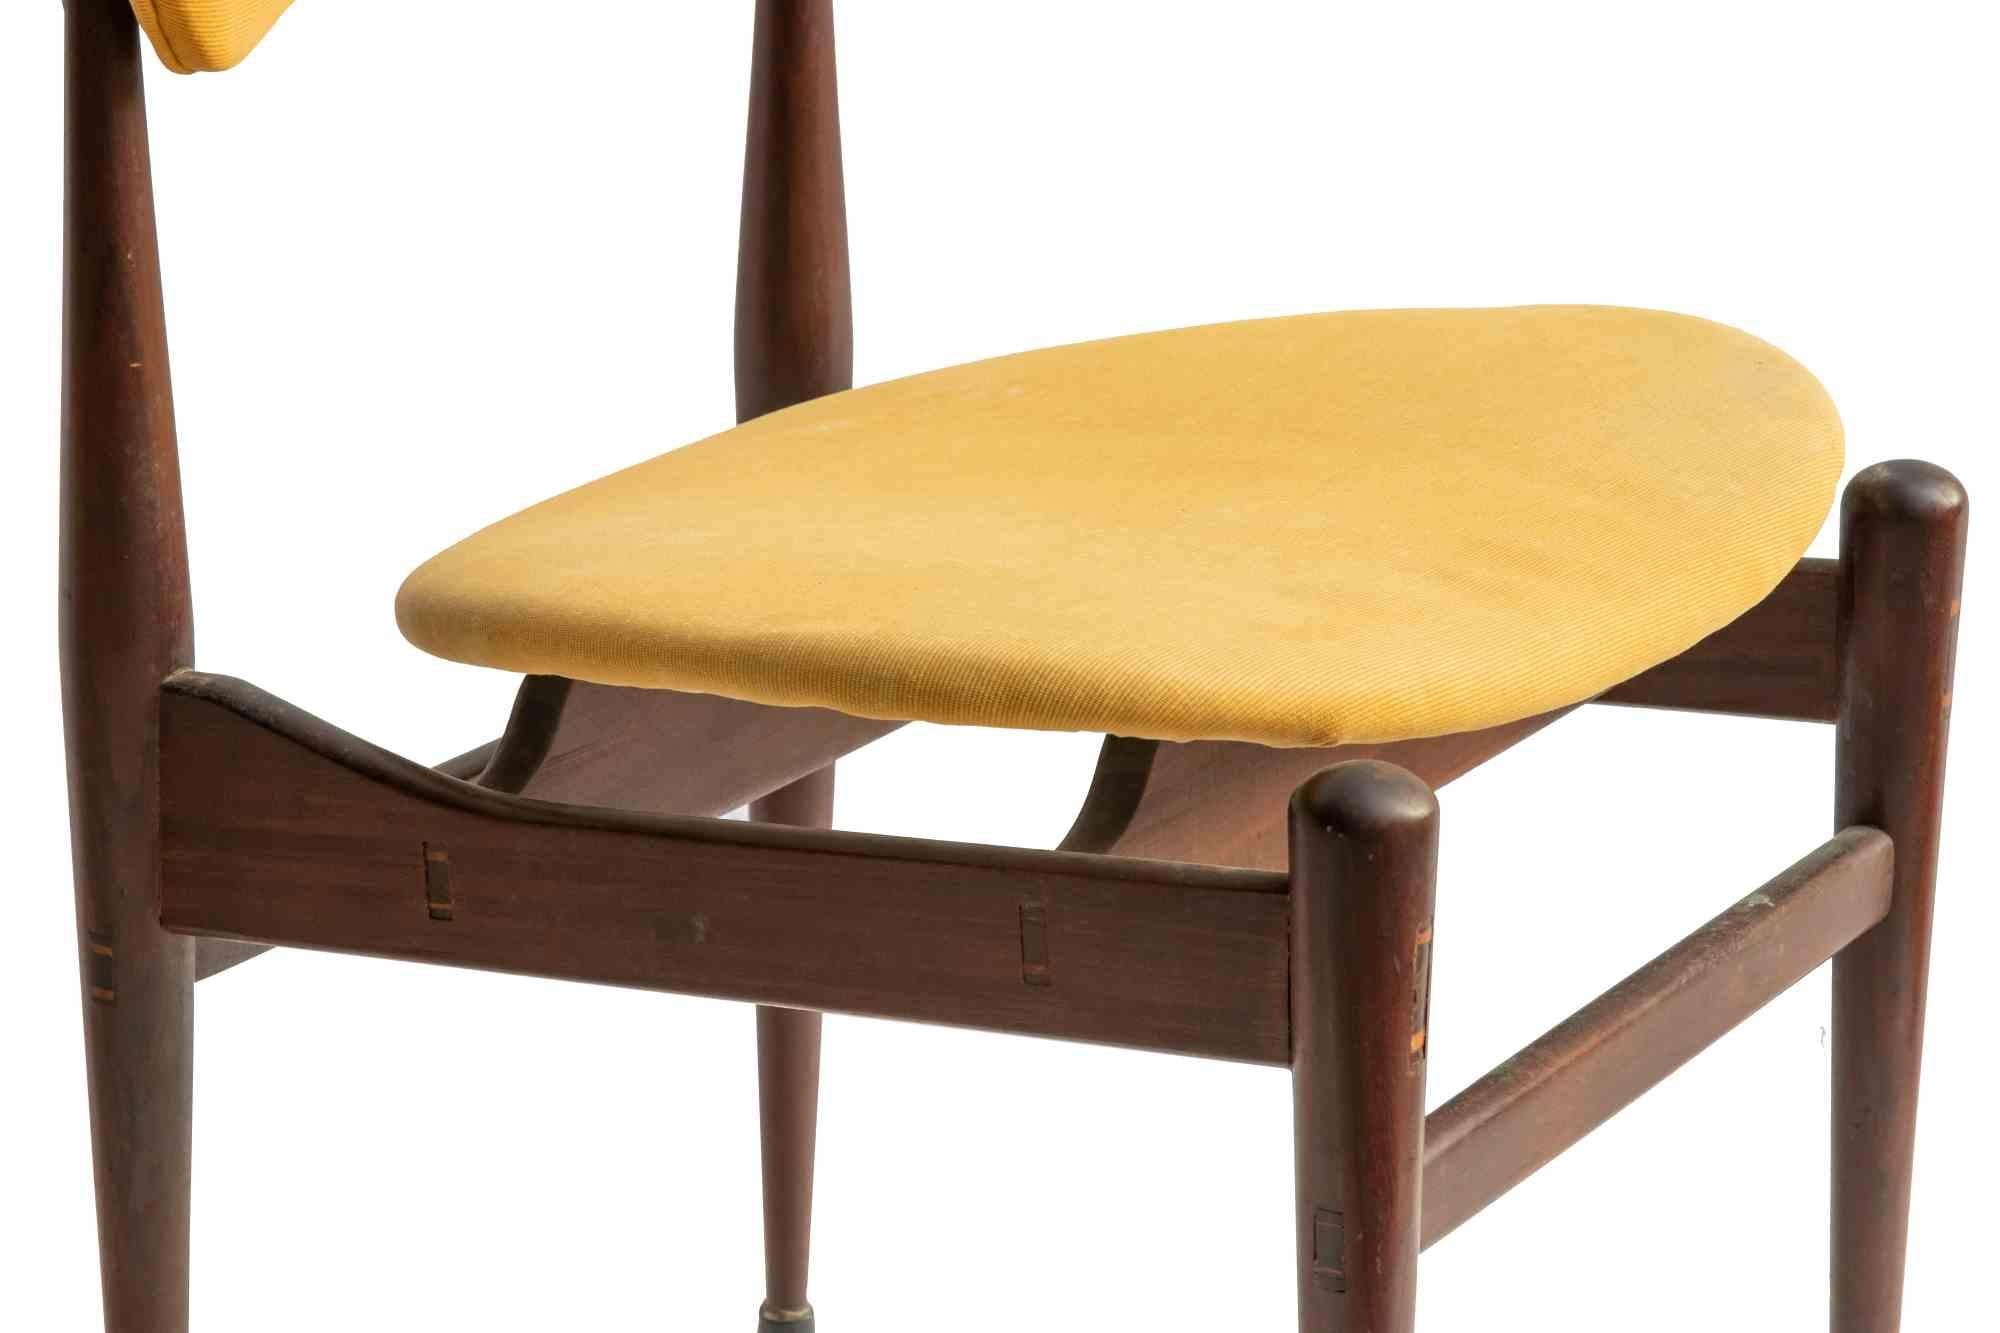 Butterfly chairs is an original design item realized by Inge e Luciano Rubino in the 1960s.

Butterfly (or Model 329) chairs were produced by Soro Stolefabrik.

Yellow fabric and wood structure

Don't miss an icon of design.

 